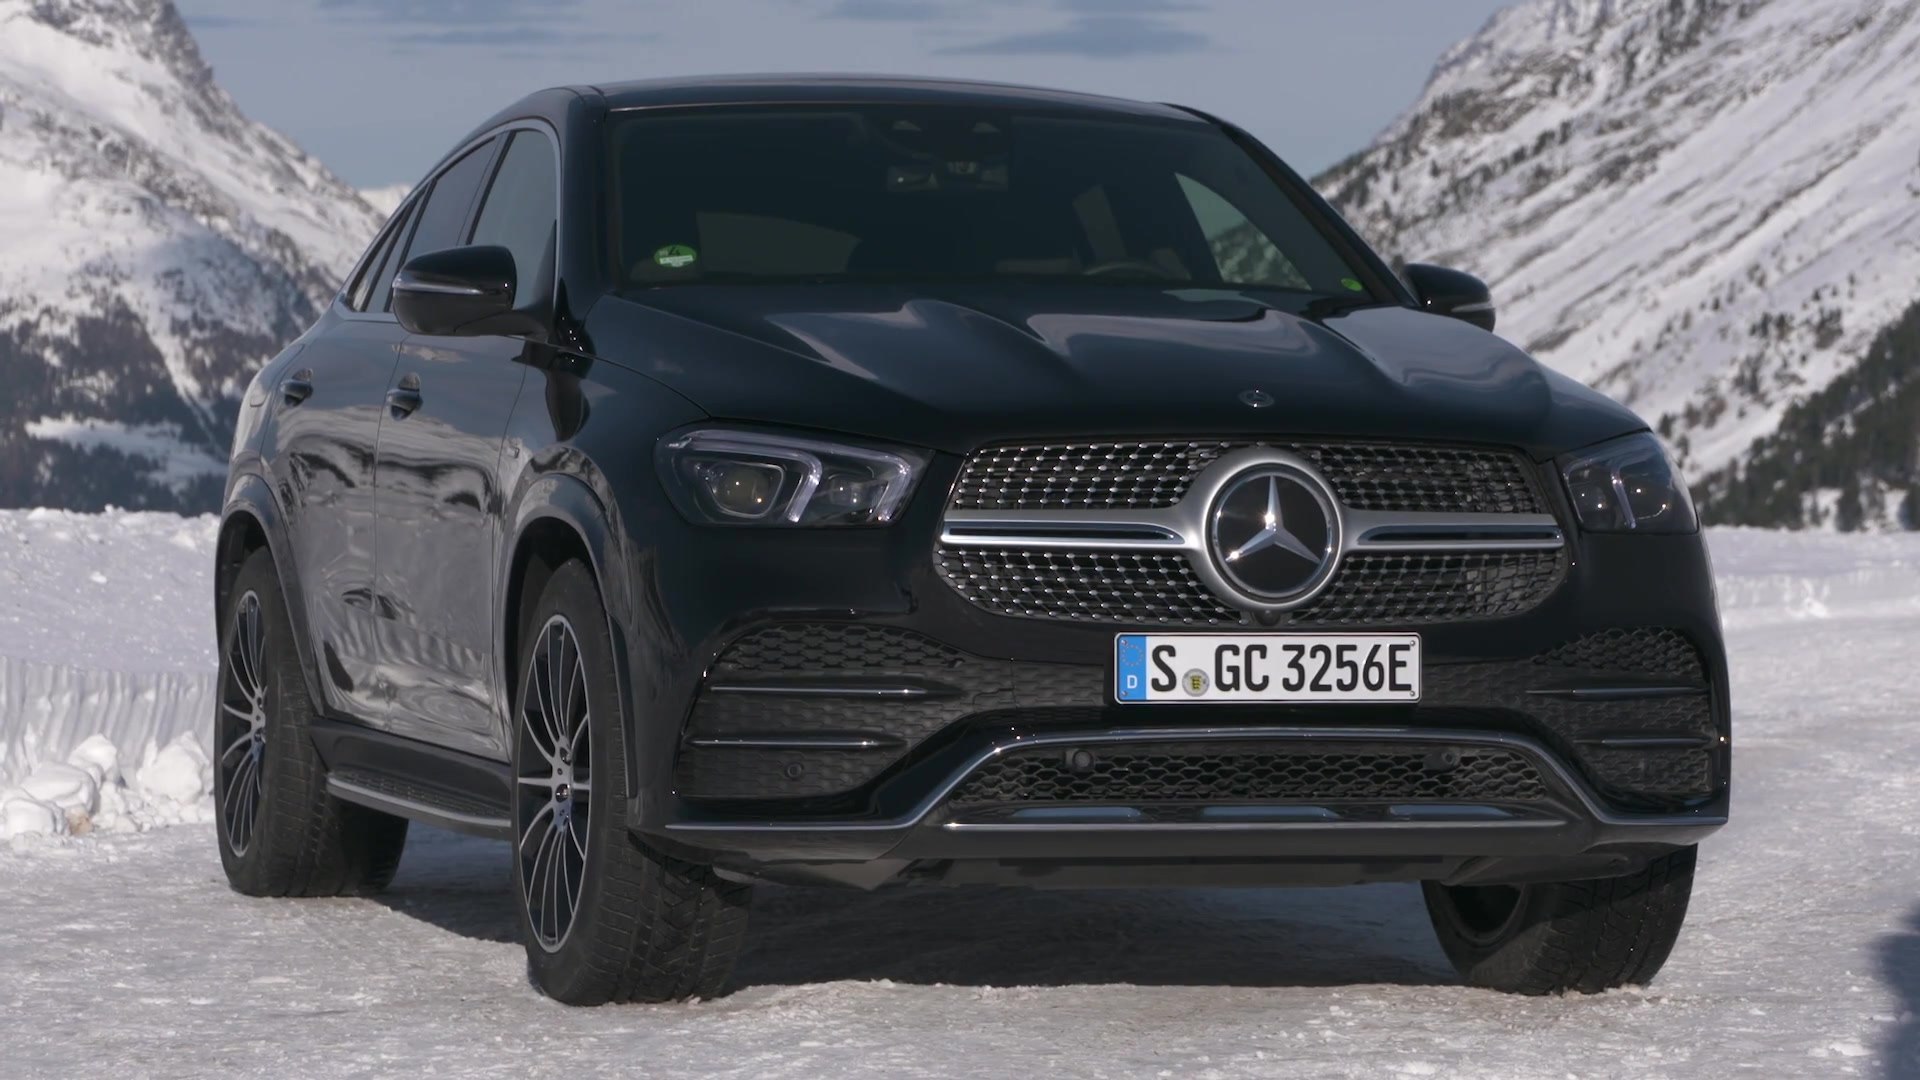 The New Mercedes Benz Gle 350 De 4matic Coupe Design In Obsidian Black Video Dailymotion